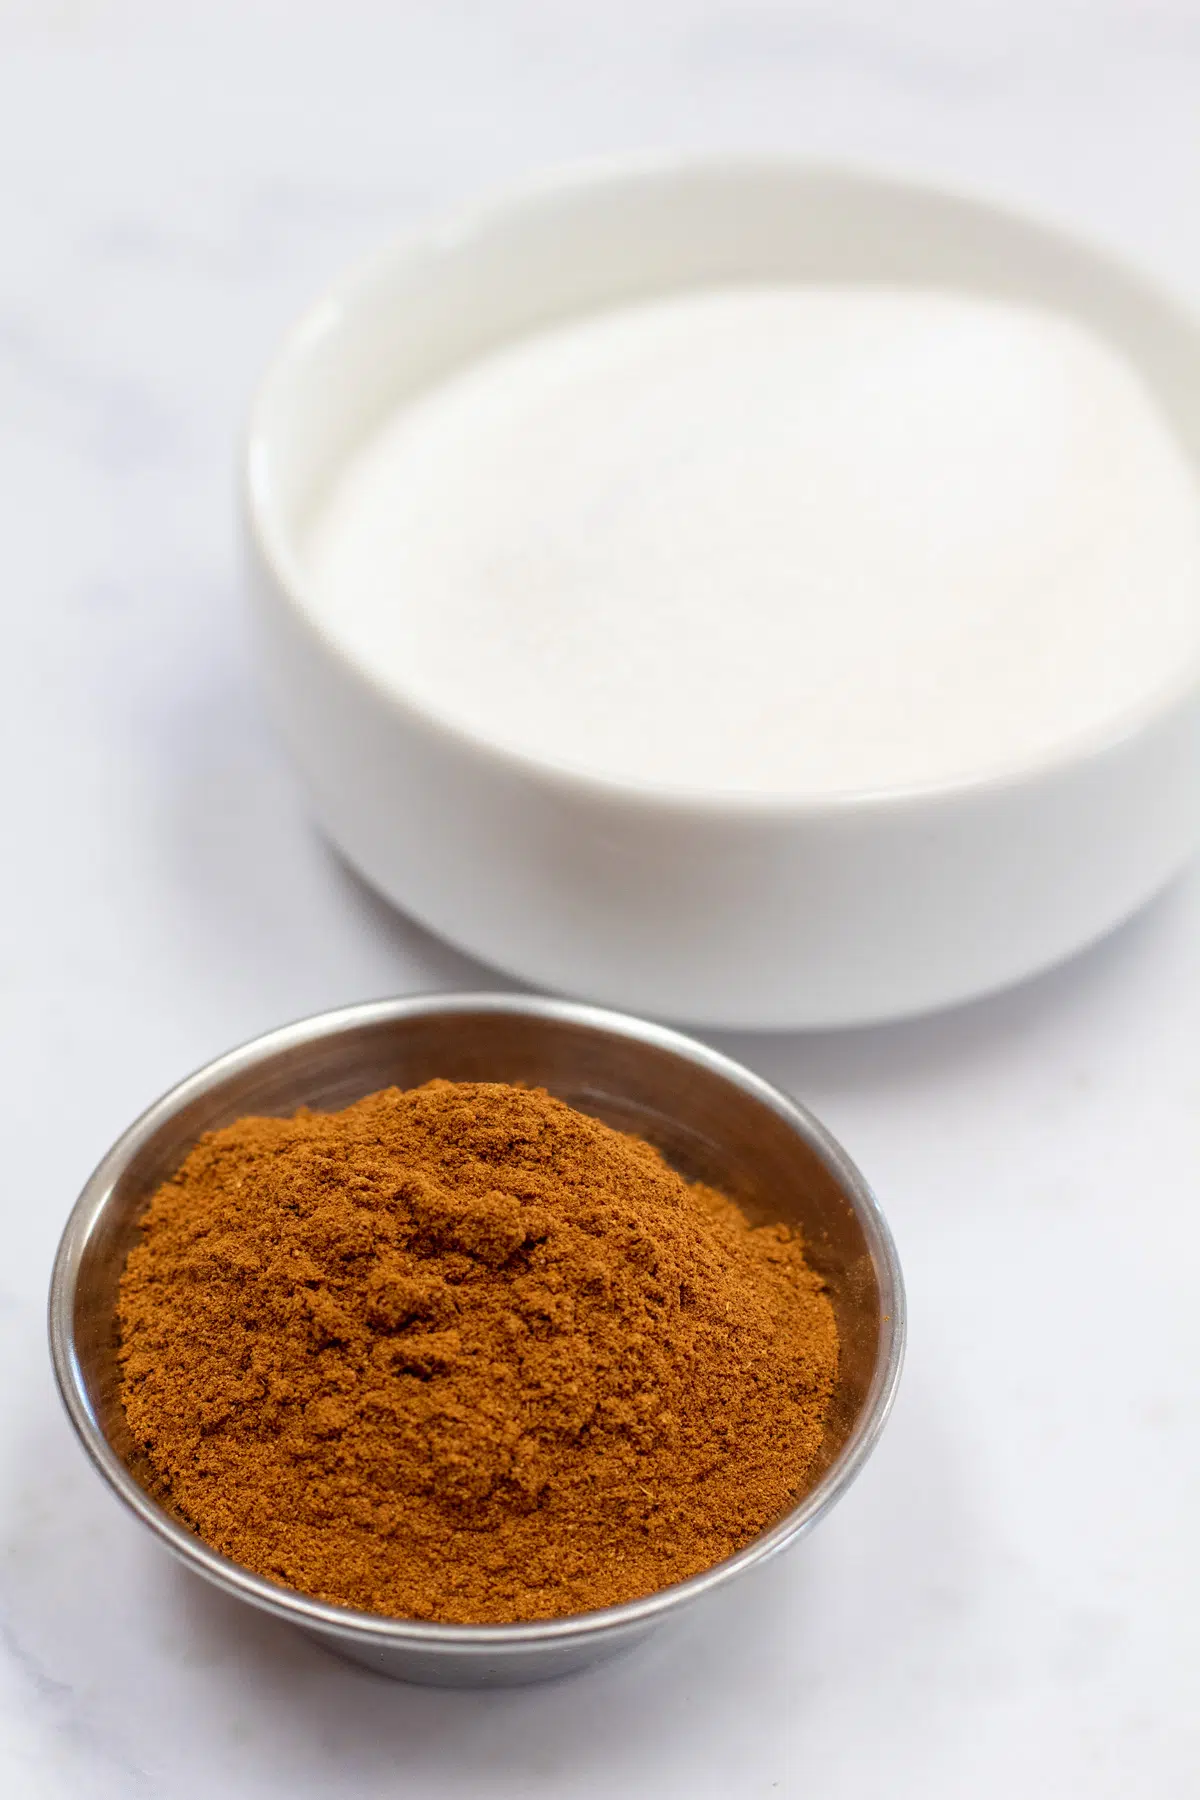 Image showing the simple 2 ingredients for cinnamon sugar.